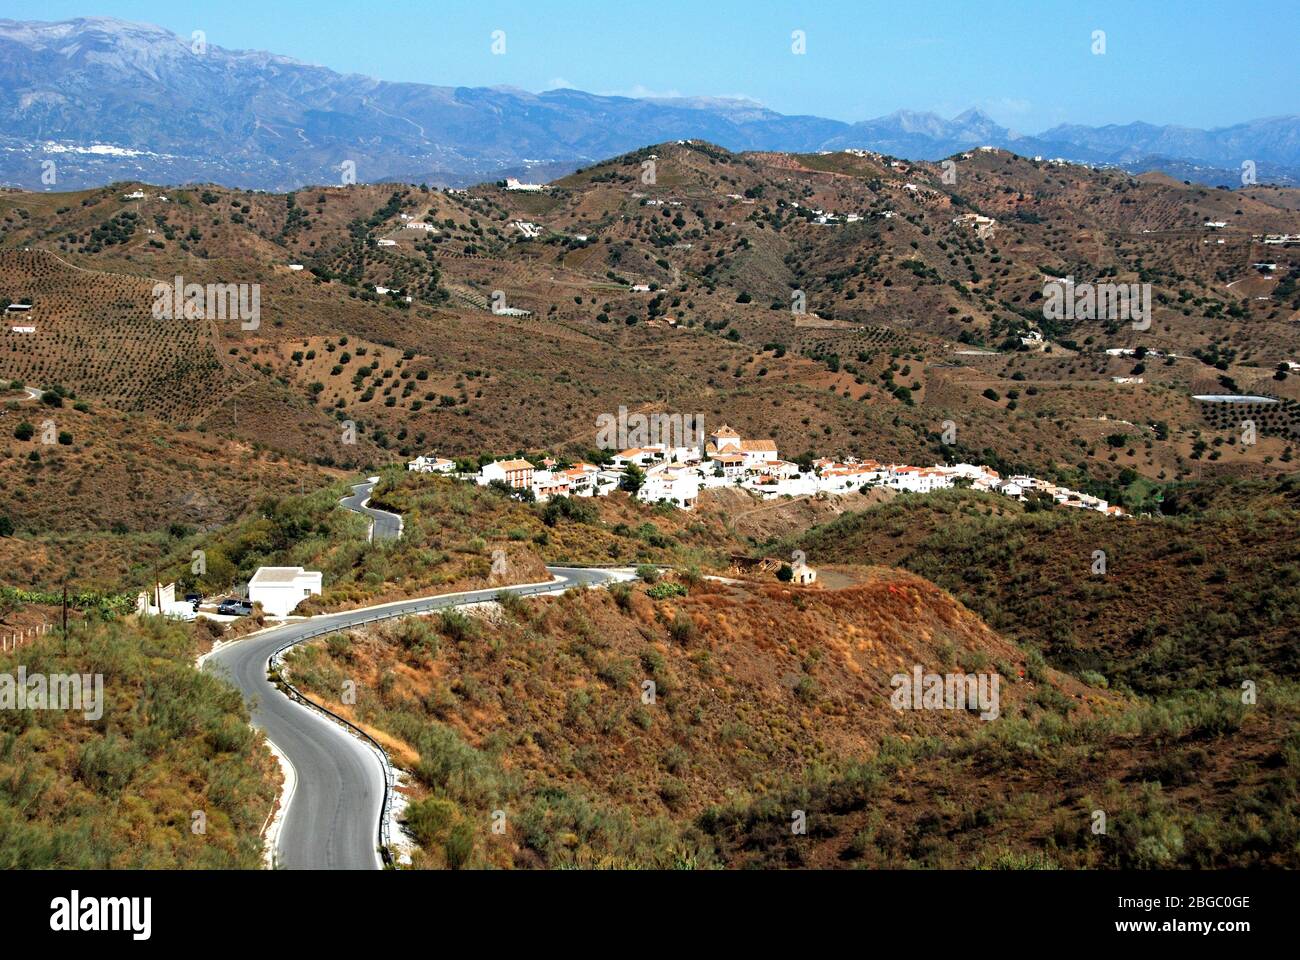 View of white village and surrounding countryside, Macharaviaya, Malaga Province, Andalucia, Spain, Western Europe. Stock Photo